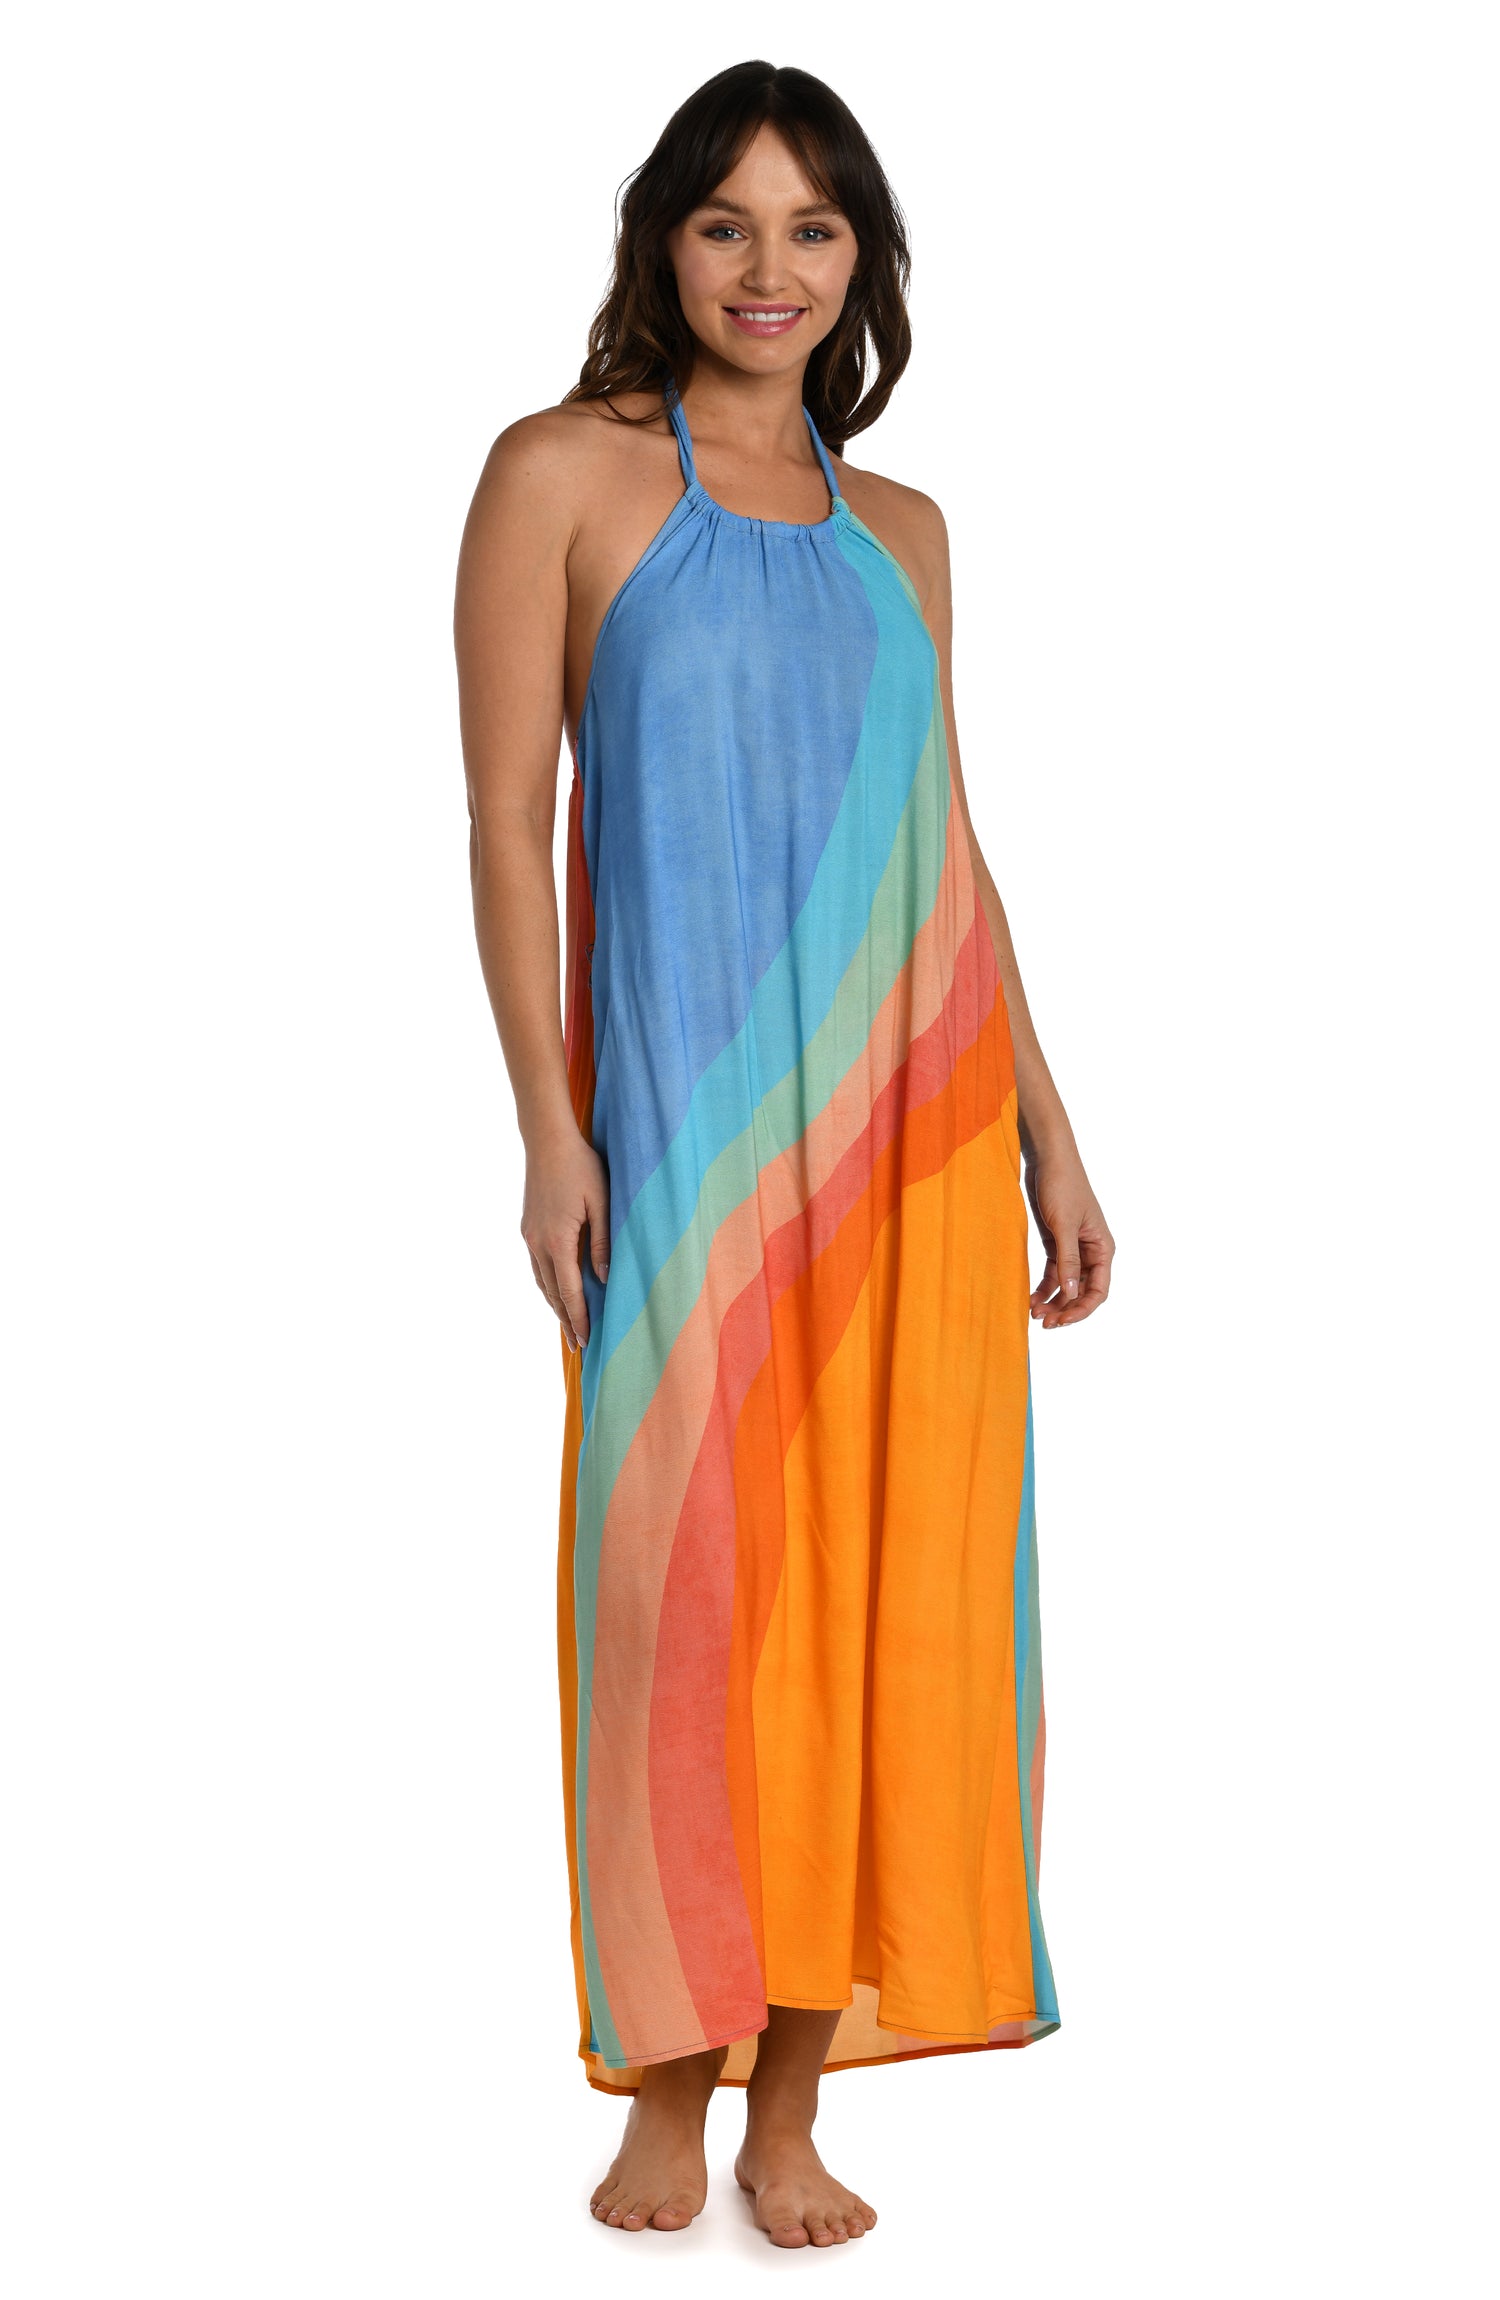 Model is wearing an orange and blue multicolored retro printed maxi dress cover up from our Mod Block collection.